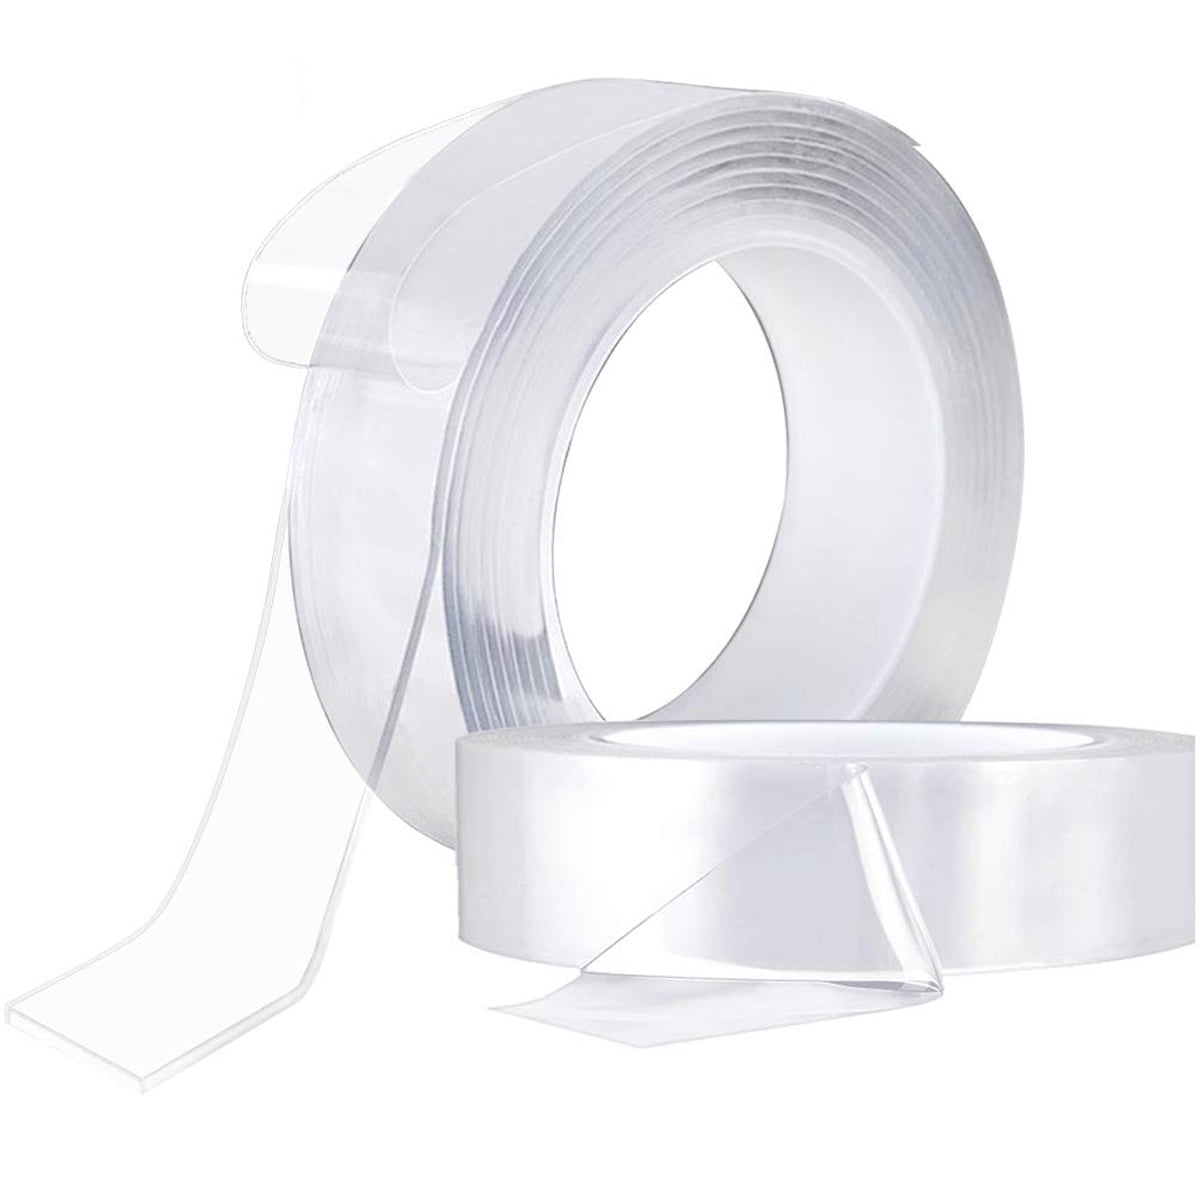 . Suitable for Home and Office Clear Tape That Can be Mounted on The Wall Without a Trace 2x9.8FT Nano Double-Sided Tape Washable and Reusable Double-Sided Tape for Crafts Multi-Purpose Tape